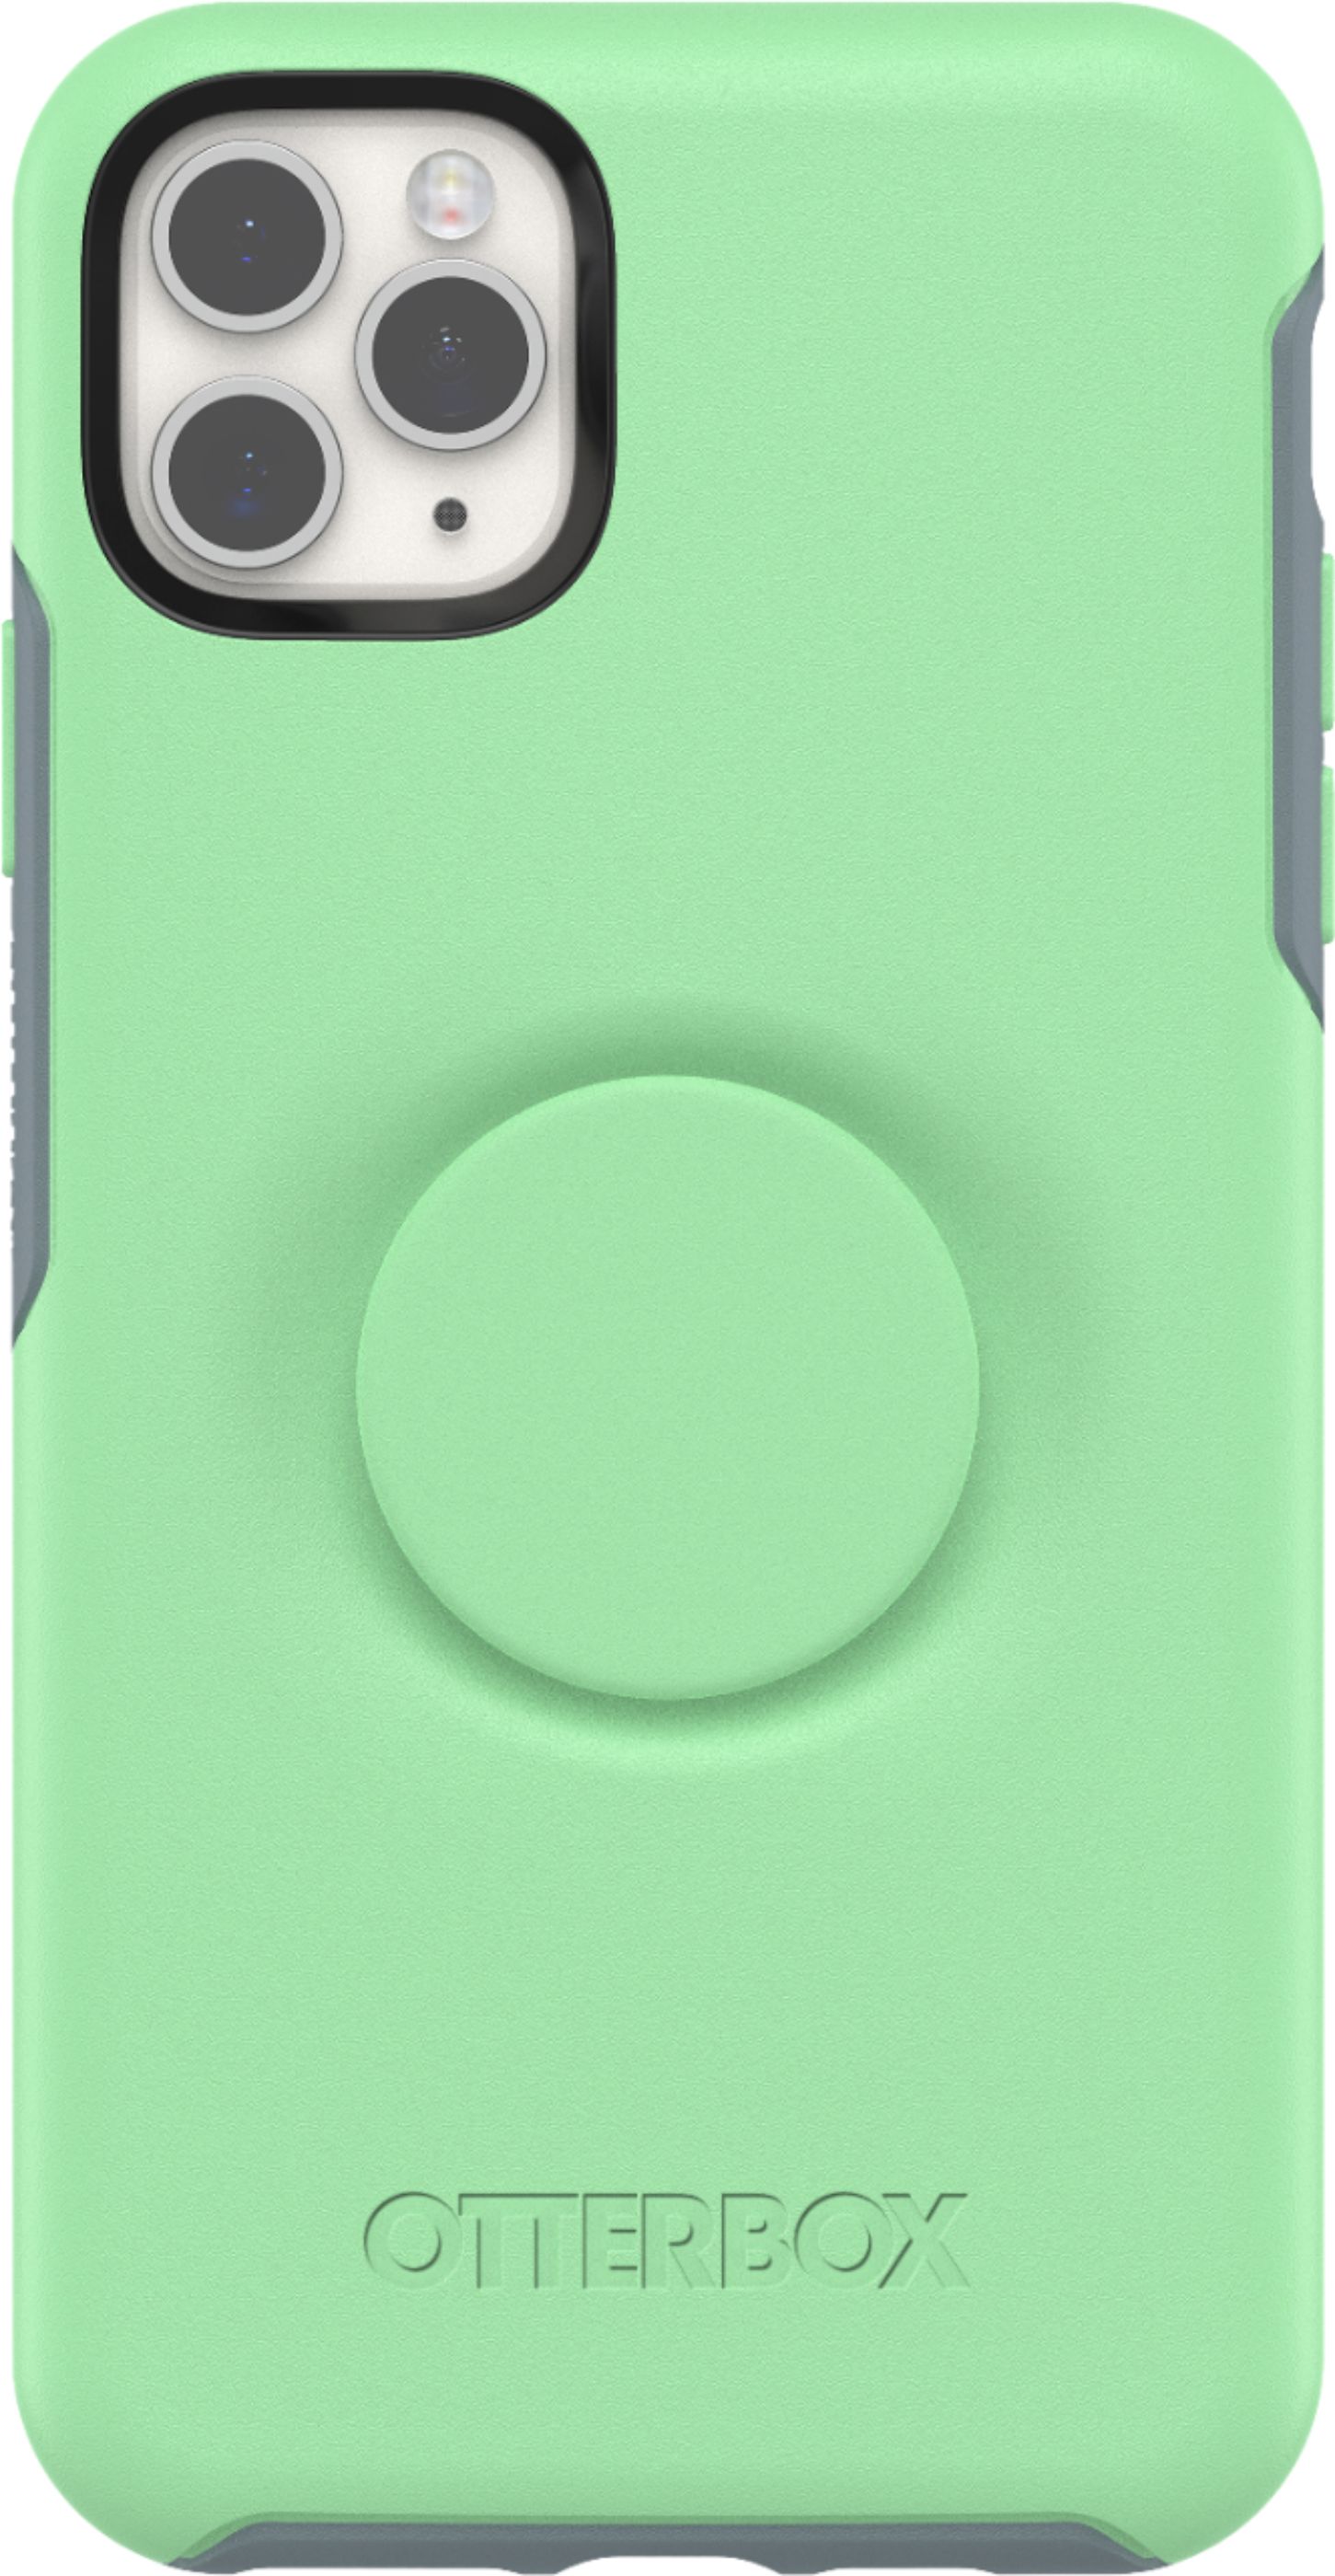 Best Buy Otterbox Pop Symmetry Series Case For Apple Iphone 11 Pro Max Mint Green 77